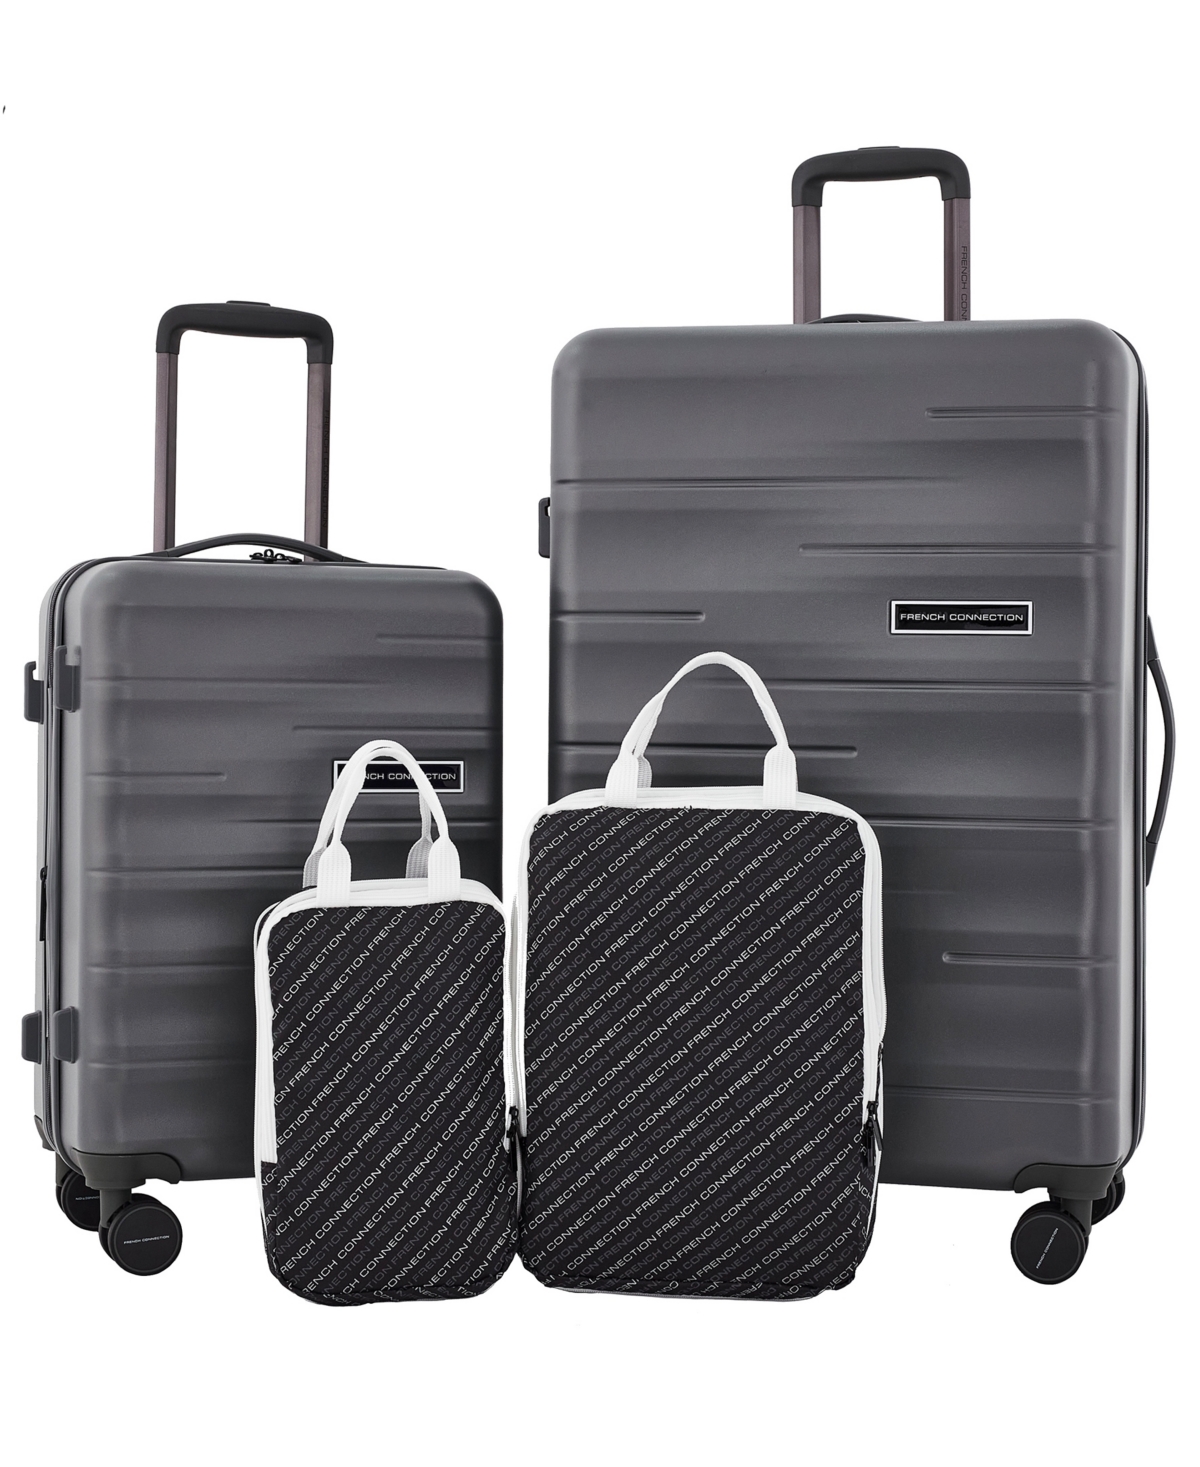 Travelers Club French Connection 4pc Expandable Rolling Hardside Luggage Set In Gunmetal Matte